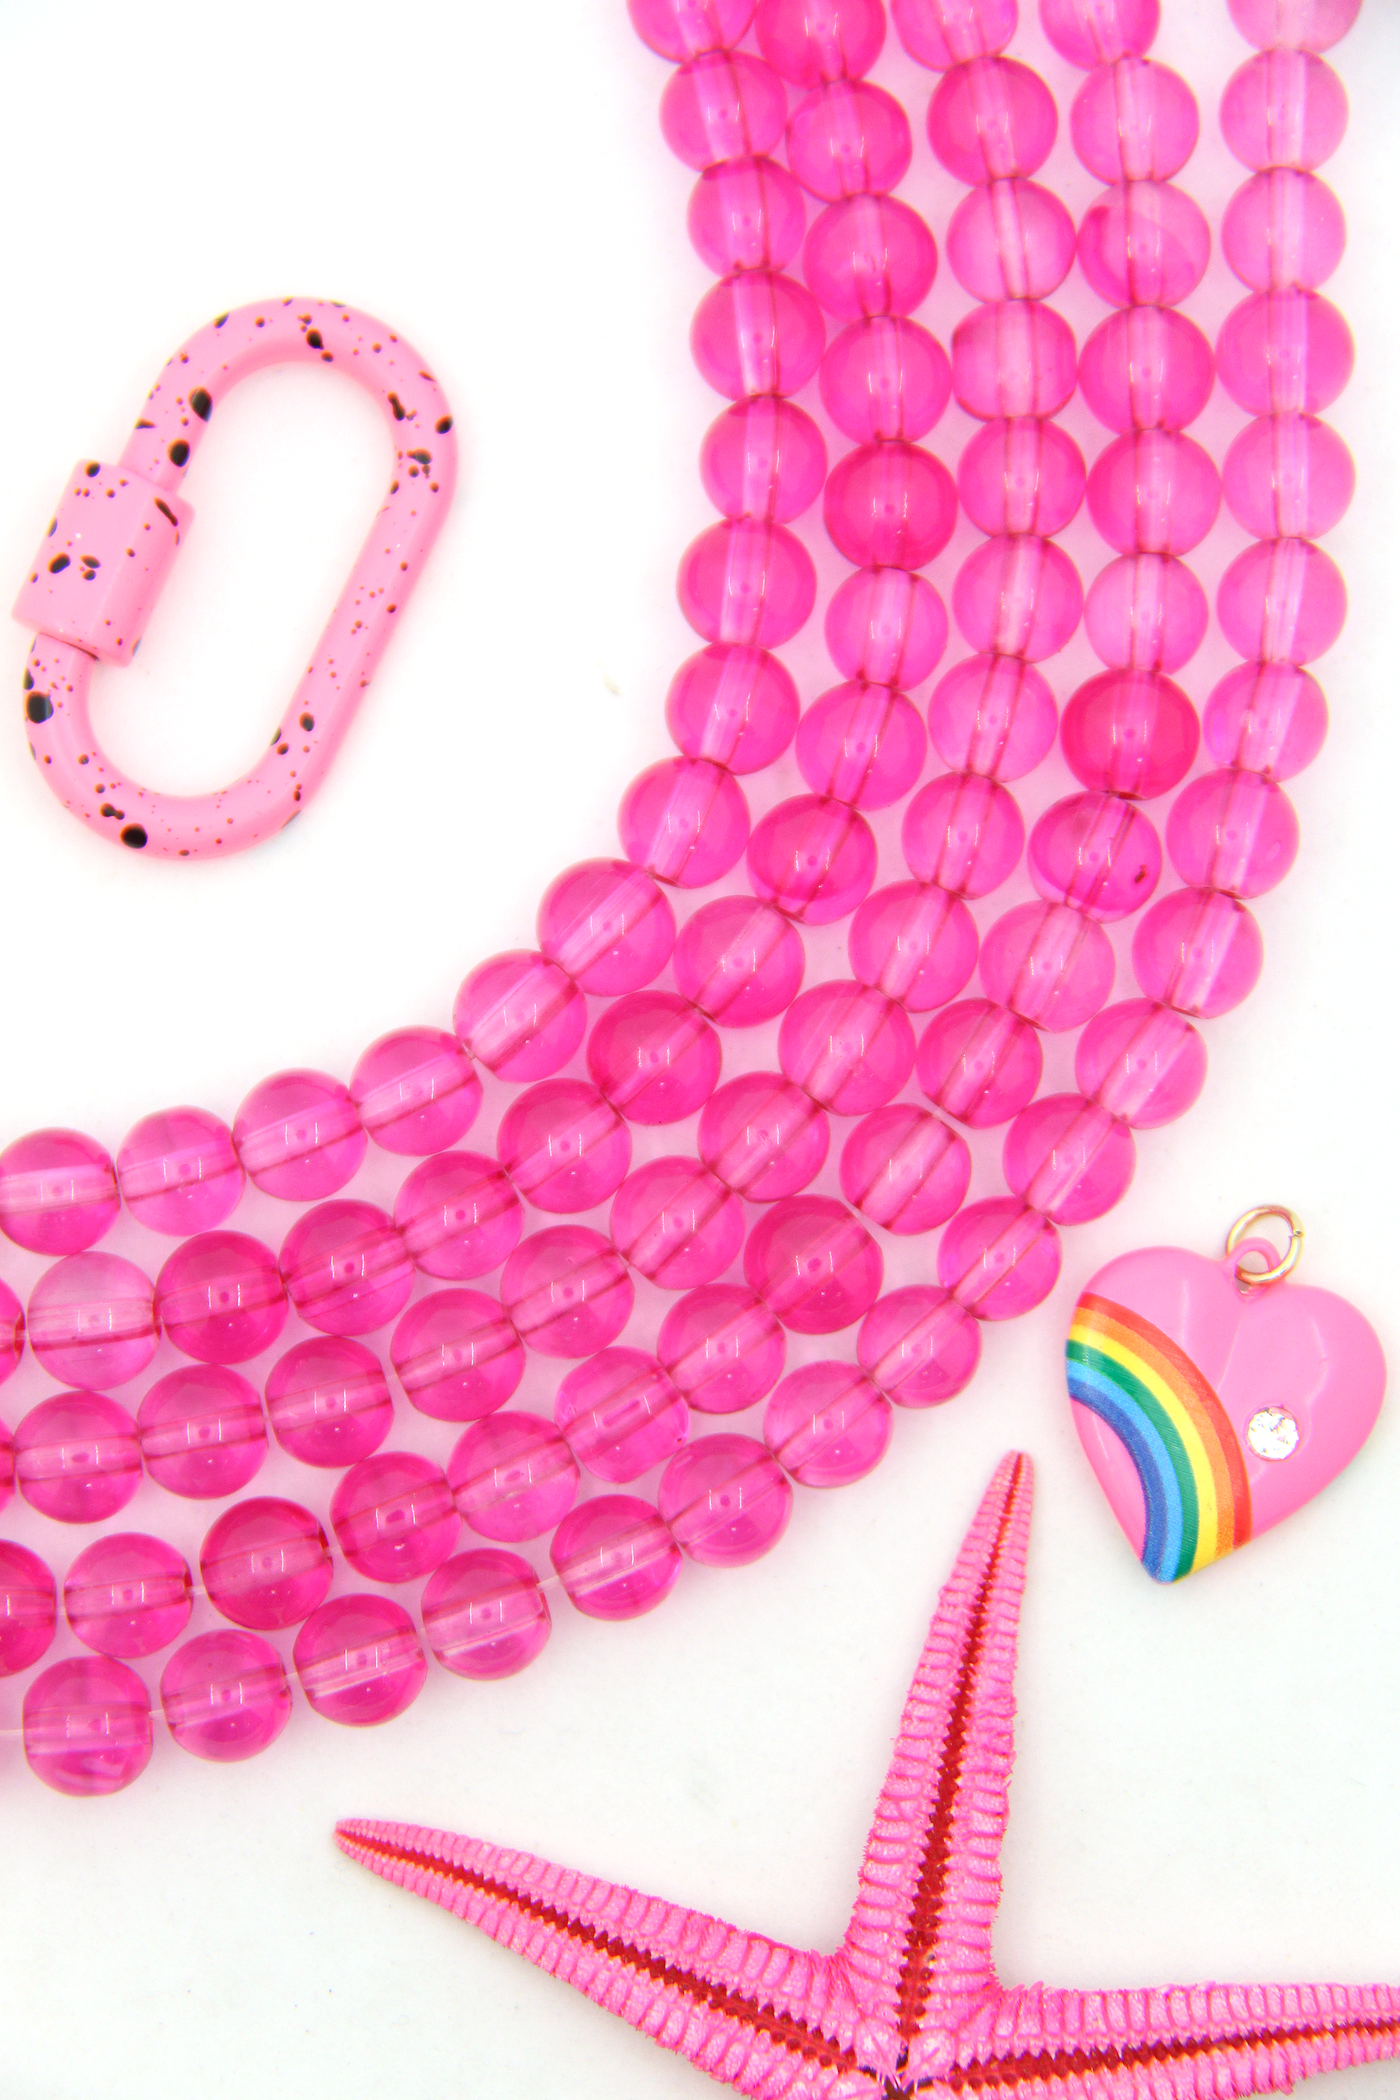 8mm Hot Pink Barbiecore Round Glass Beads, 25 Beads, Pink Aesthetic Beads for Making Bracelets